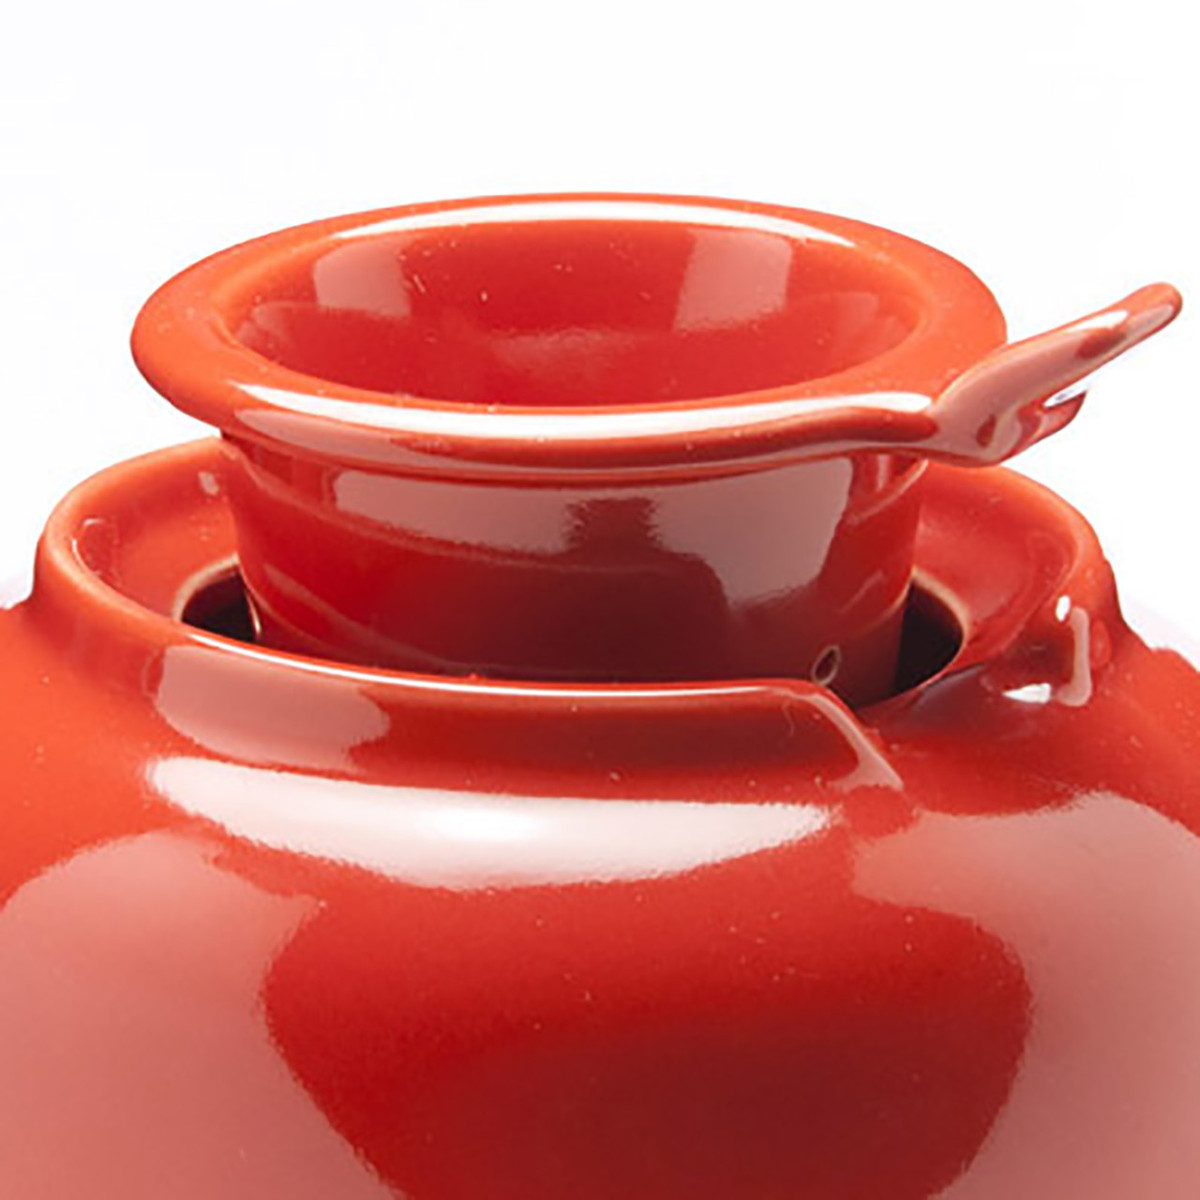 Amsterdam 2 Cup Infuser Teapot - Red